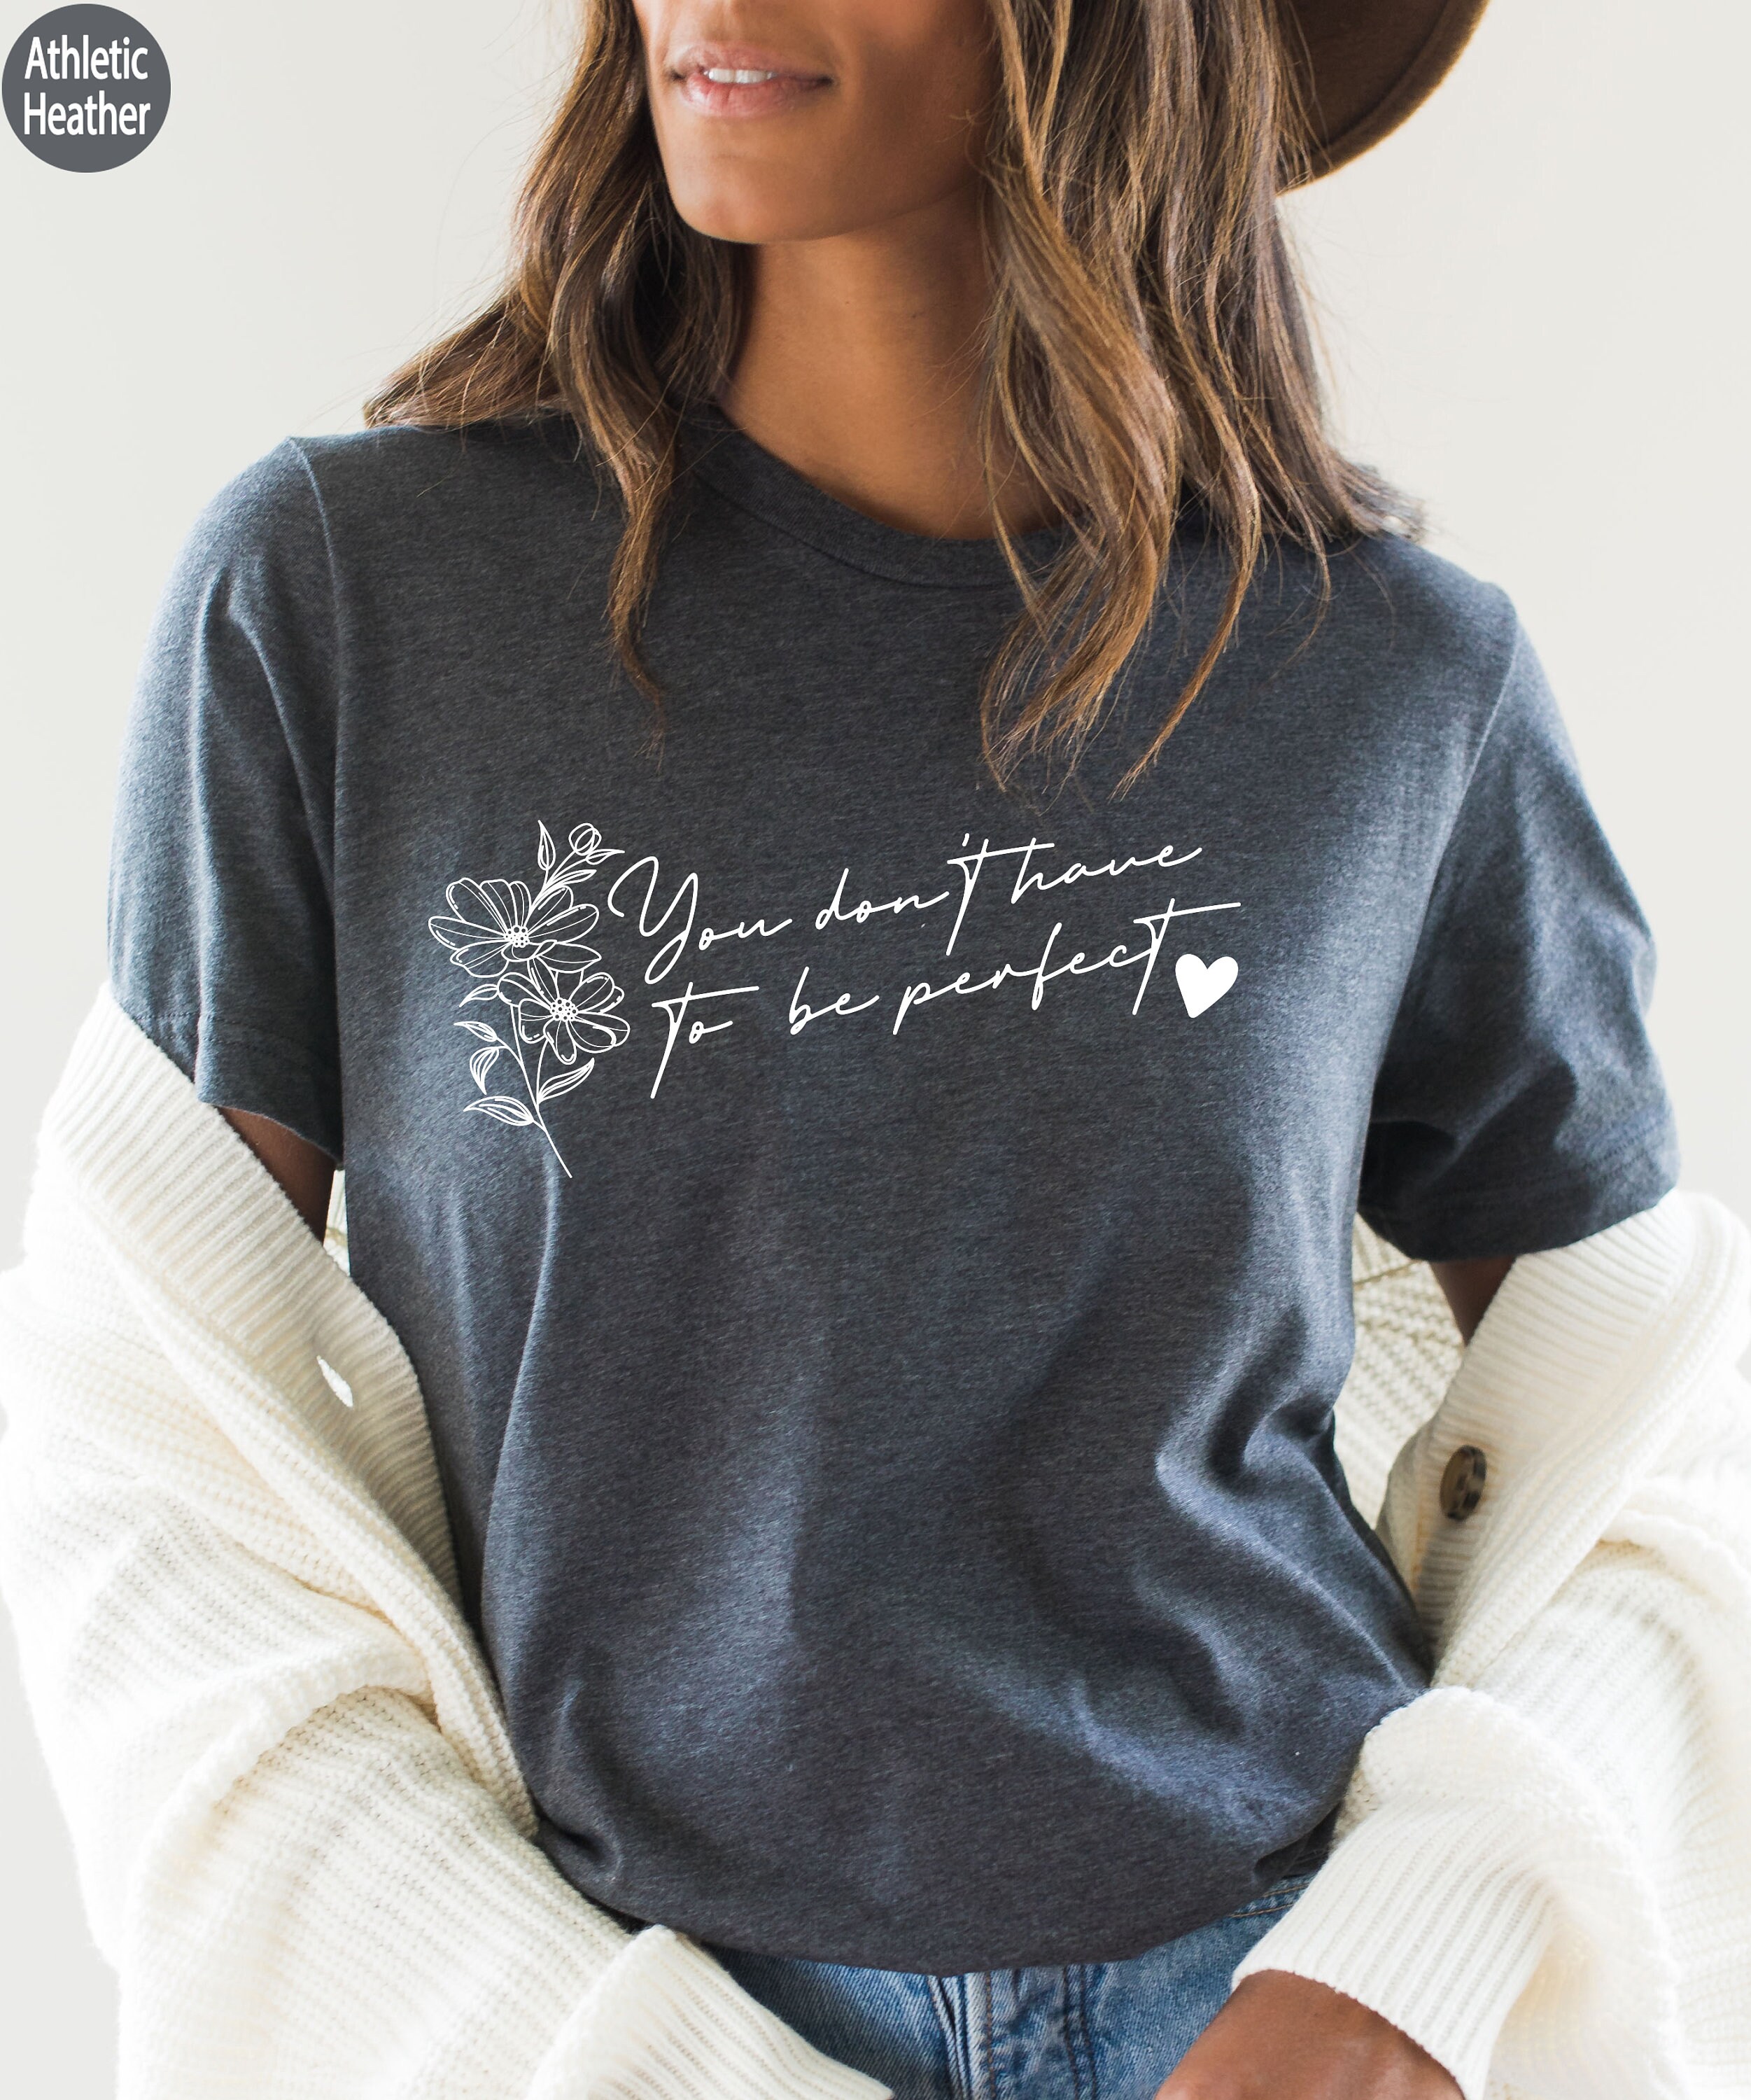 Discover You Don't Have To Be Perfect Shirt, Self Love Shirt, Mental Health Sweatshirt, Women's Day Gift, Best Friend Gift, Aesthetic Tshirt, P7832